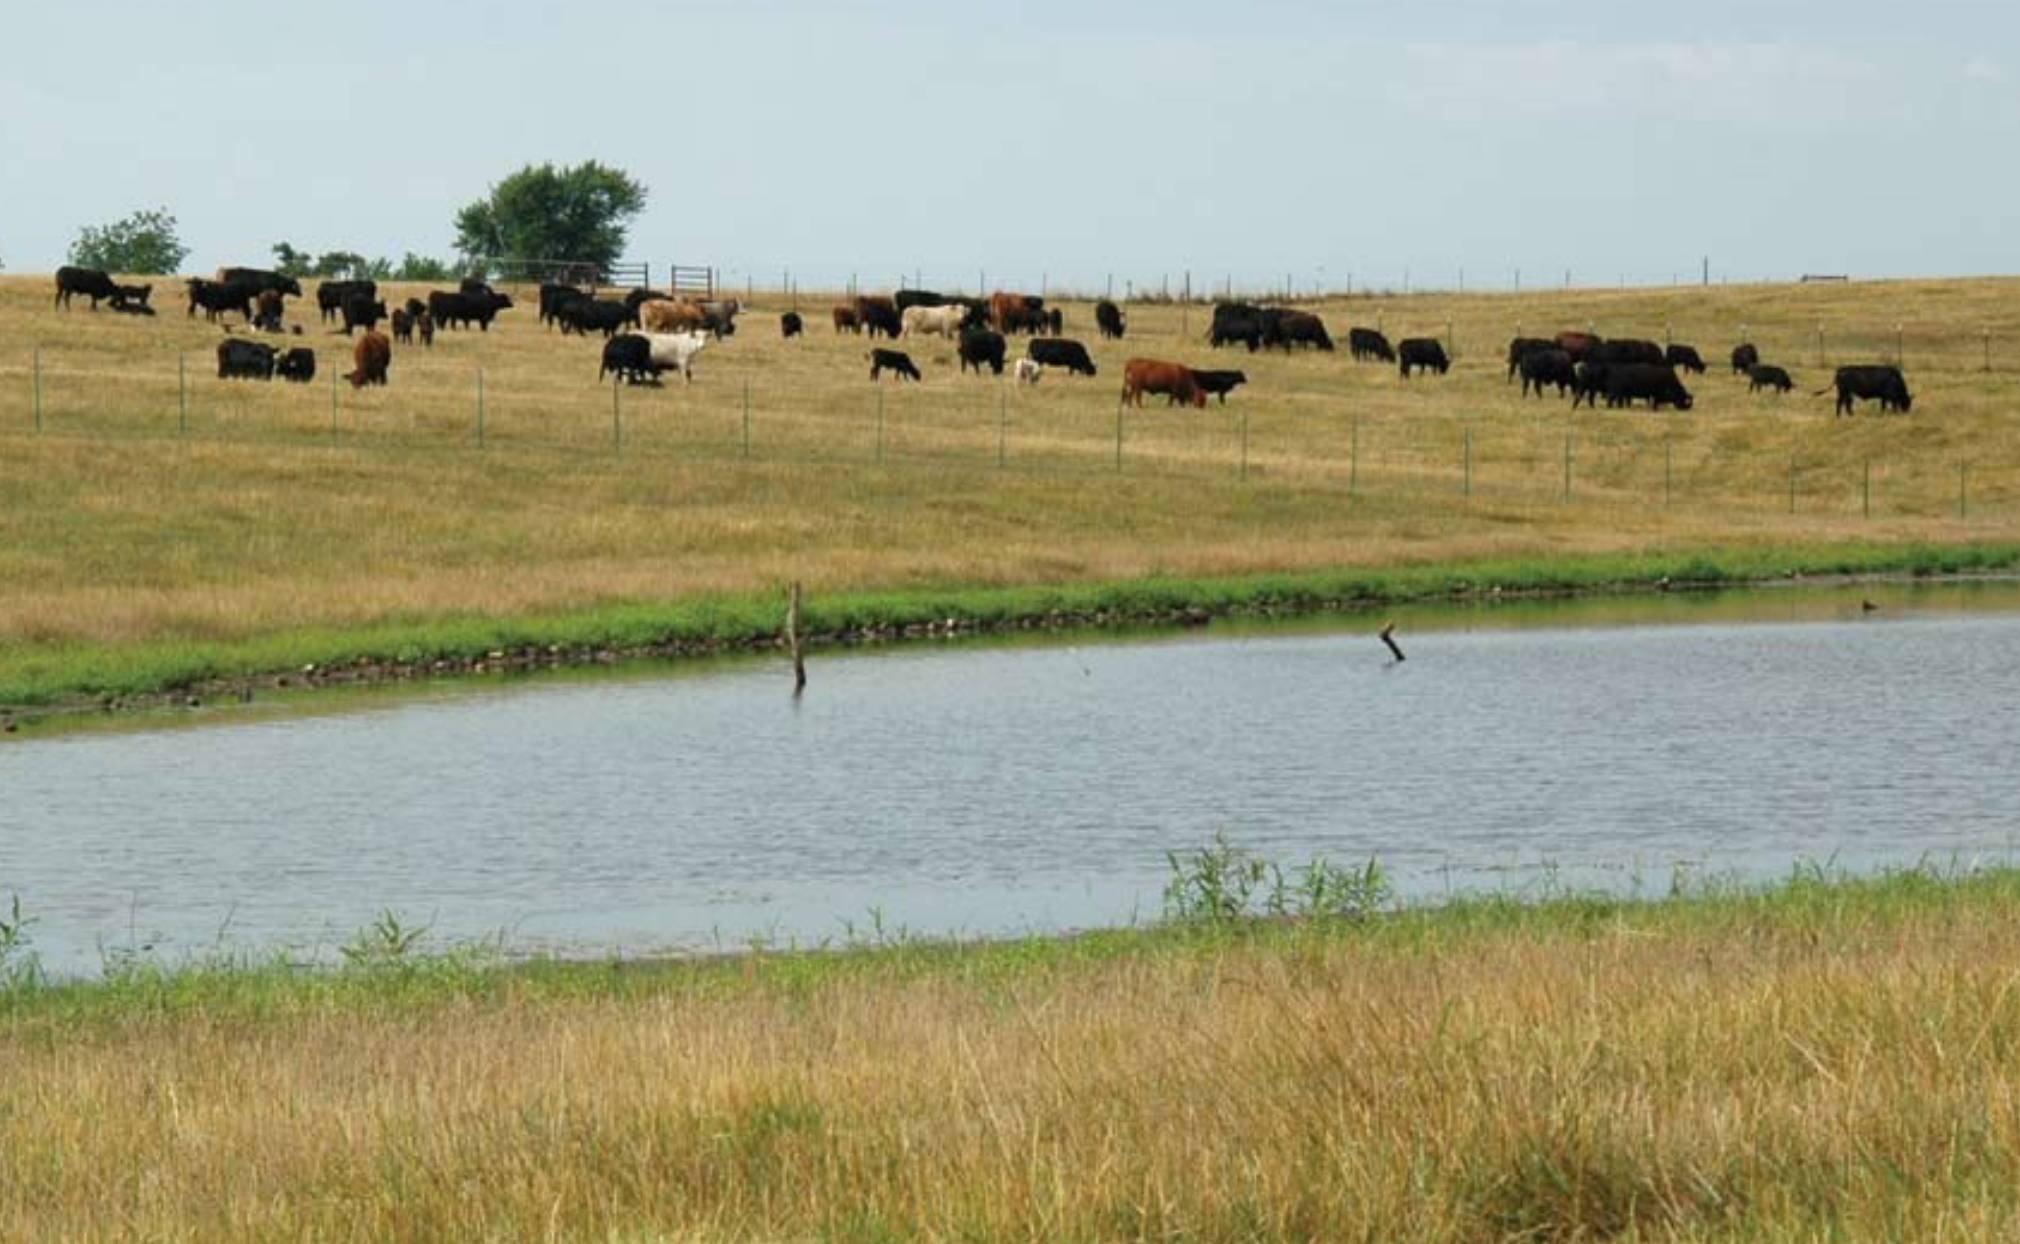 A herd of cattle grazing near a stock pond.